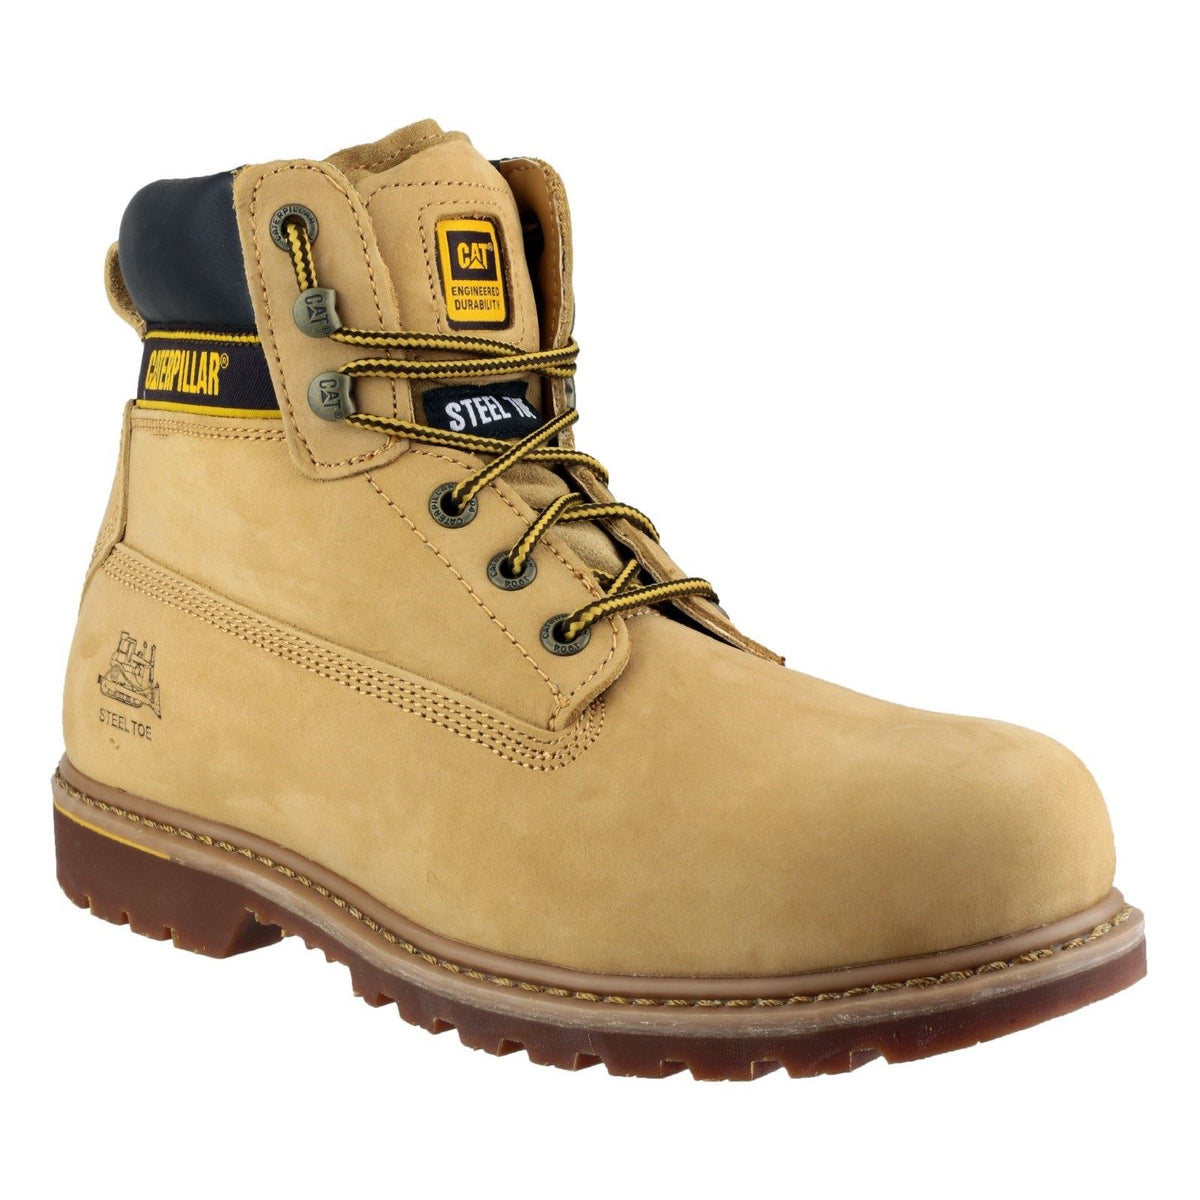 Caterpillar Holton S3 Safety Boots